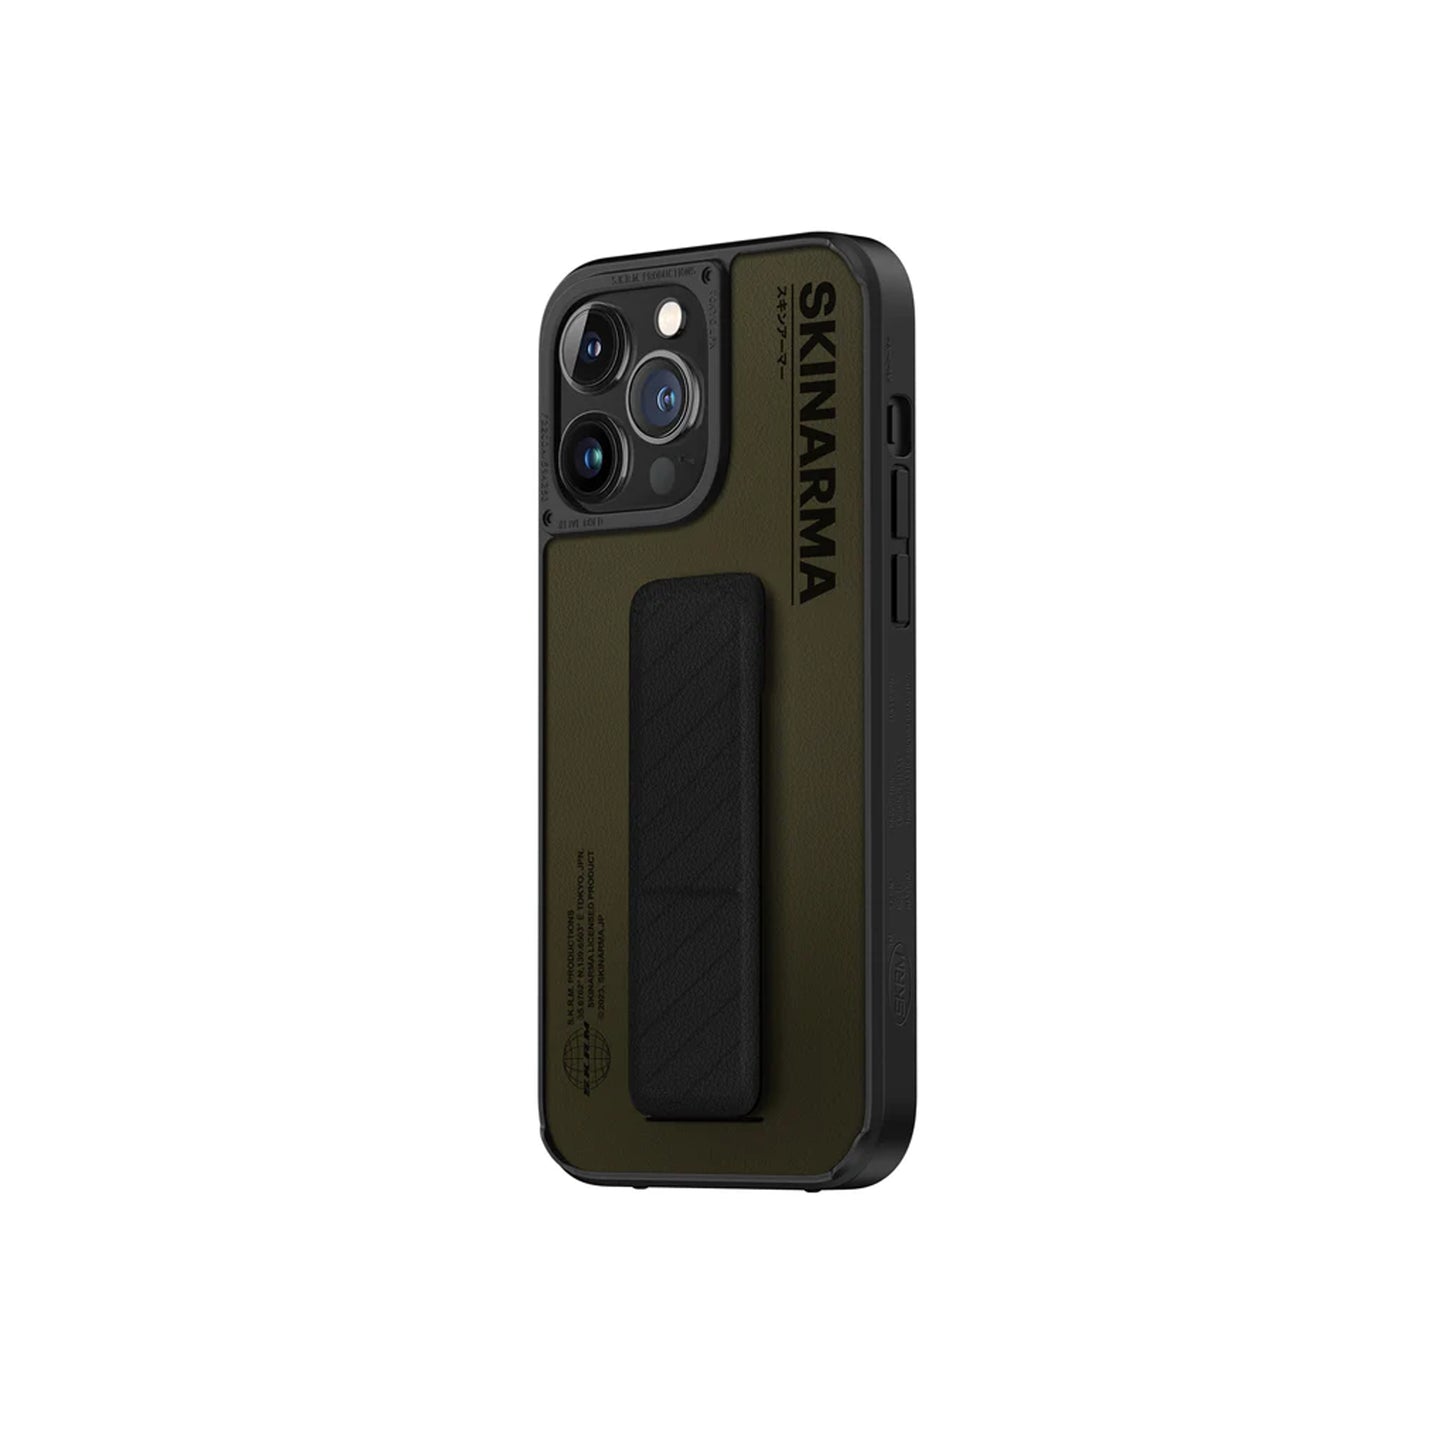 [ONLINE ONLY] Skinarma Gyo for iPhone 14 Pro Max - Green ( Barcode: 8886461242928 )